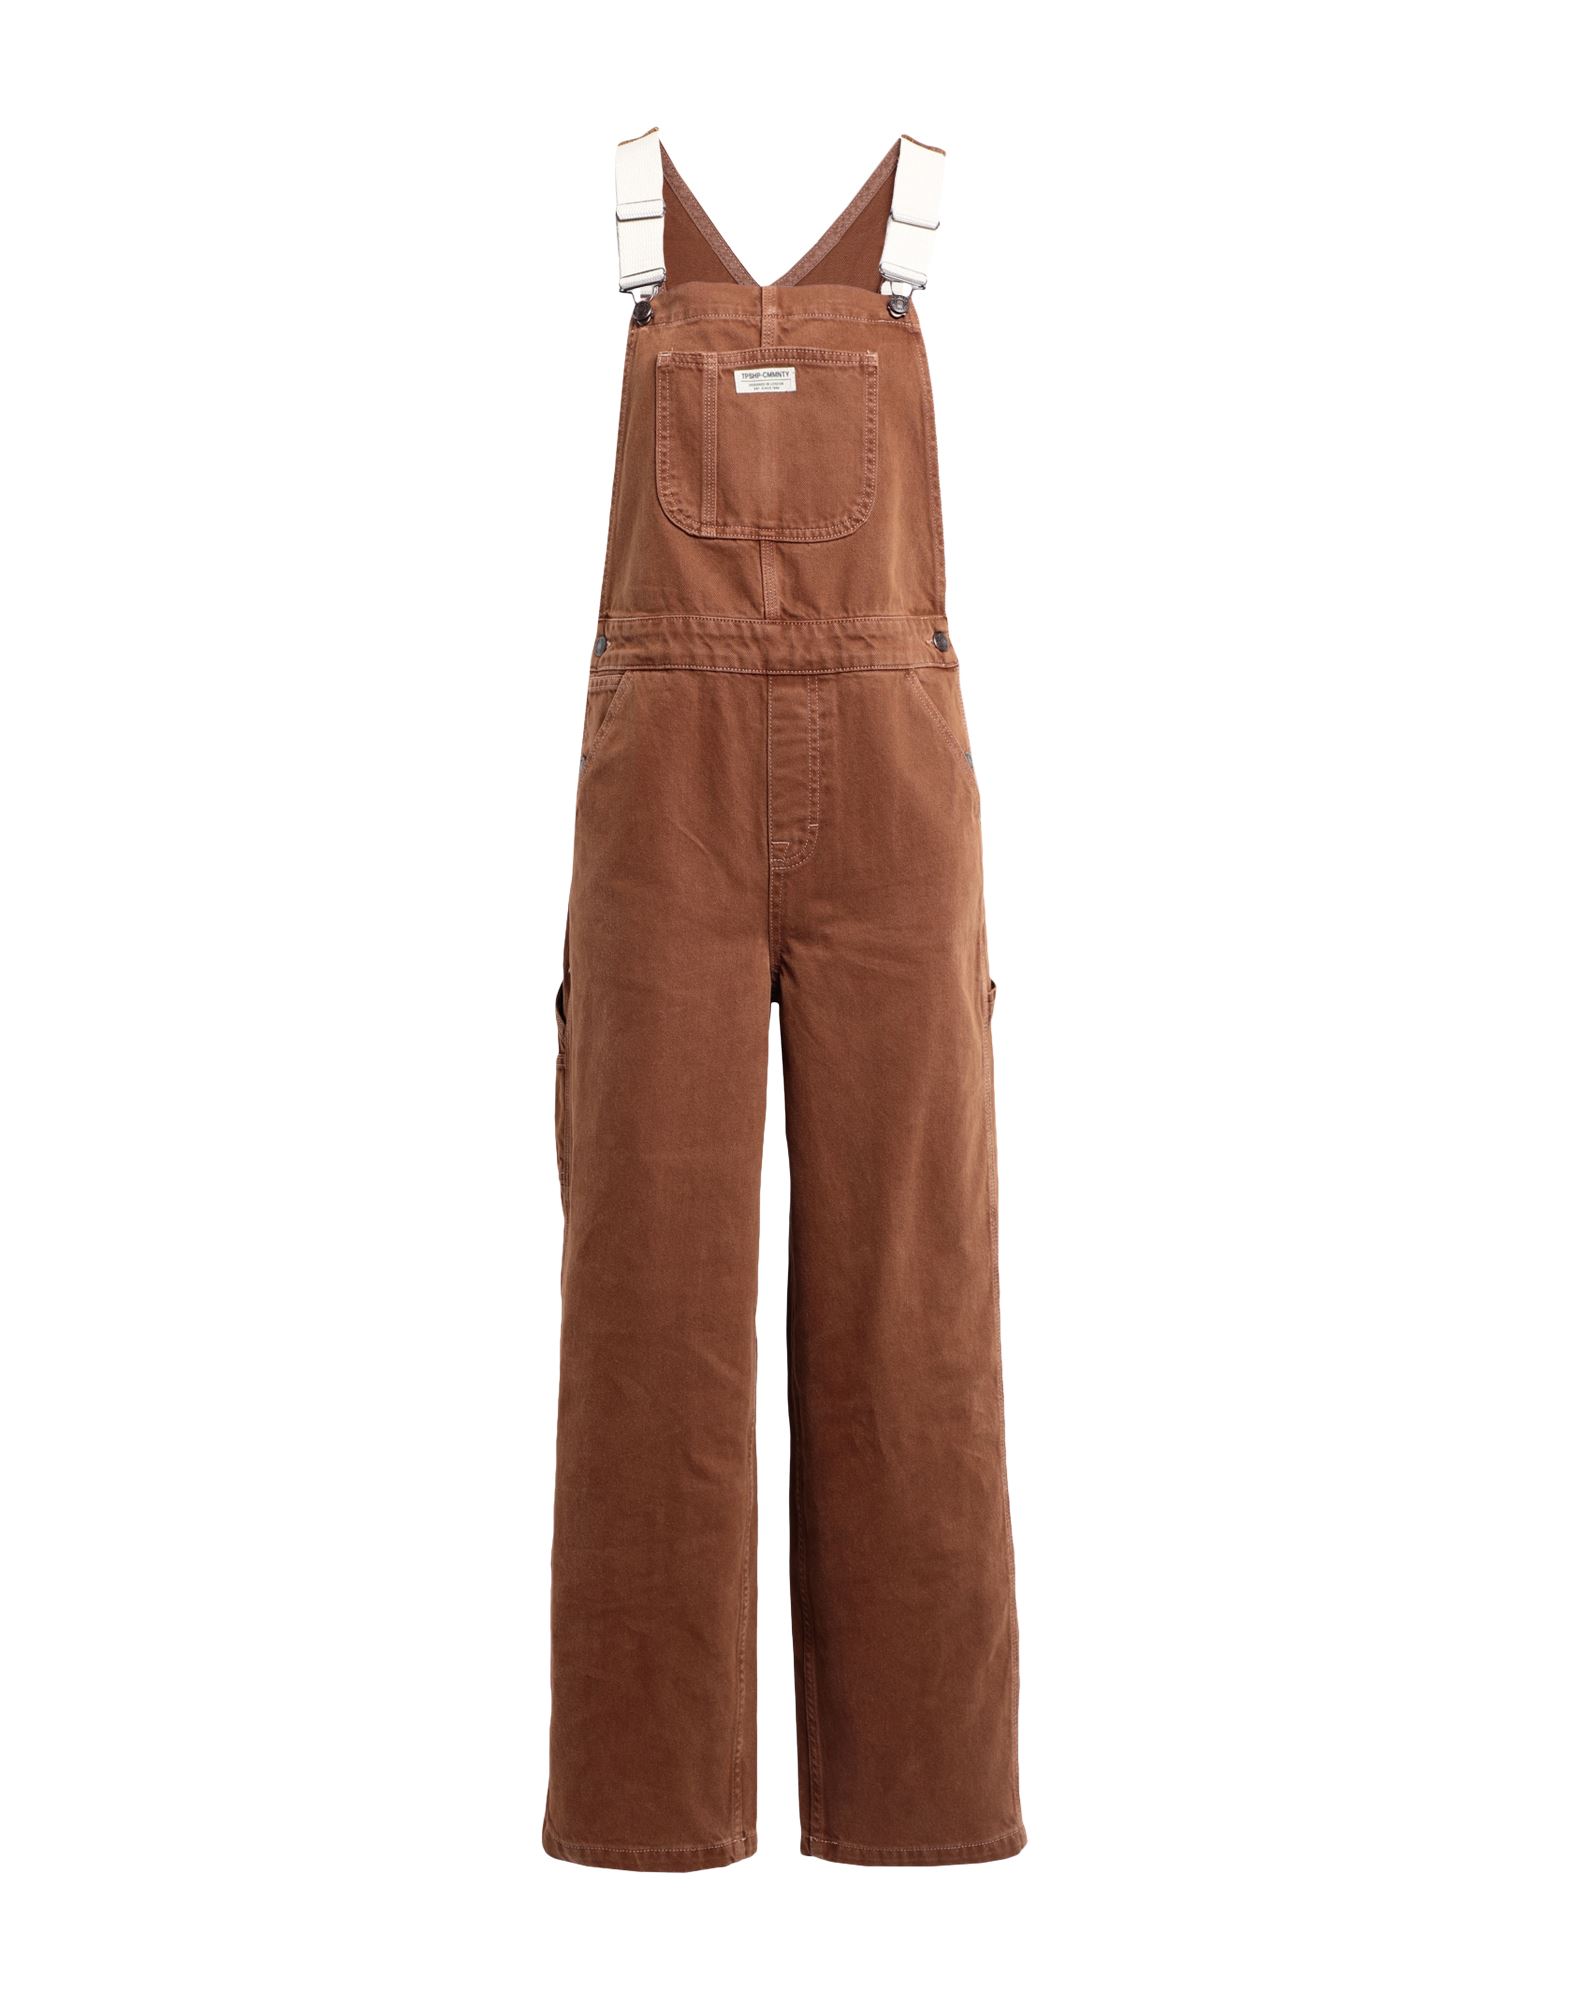 TOPSHOP TOPSHOP WOMAN OVERALLS BROWN SIZE 2 COTTON